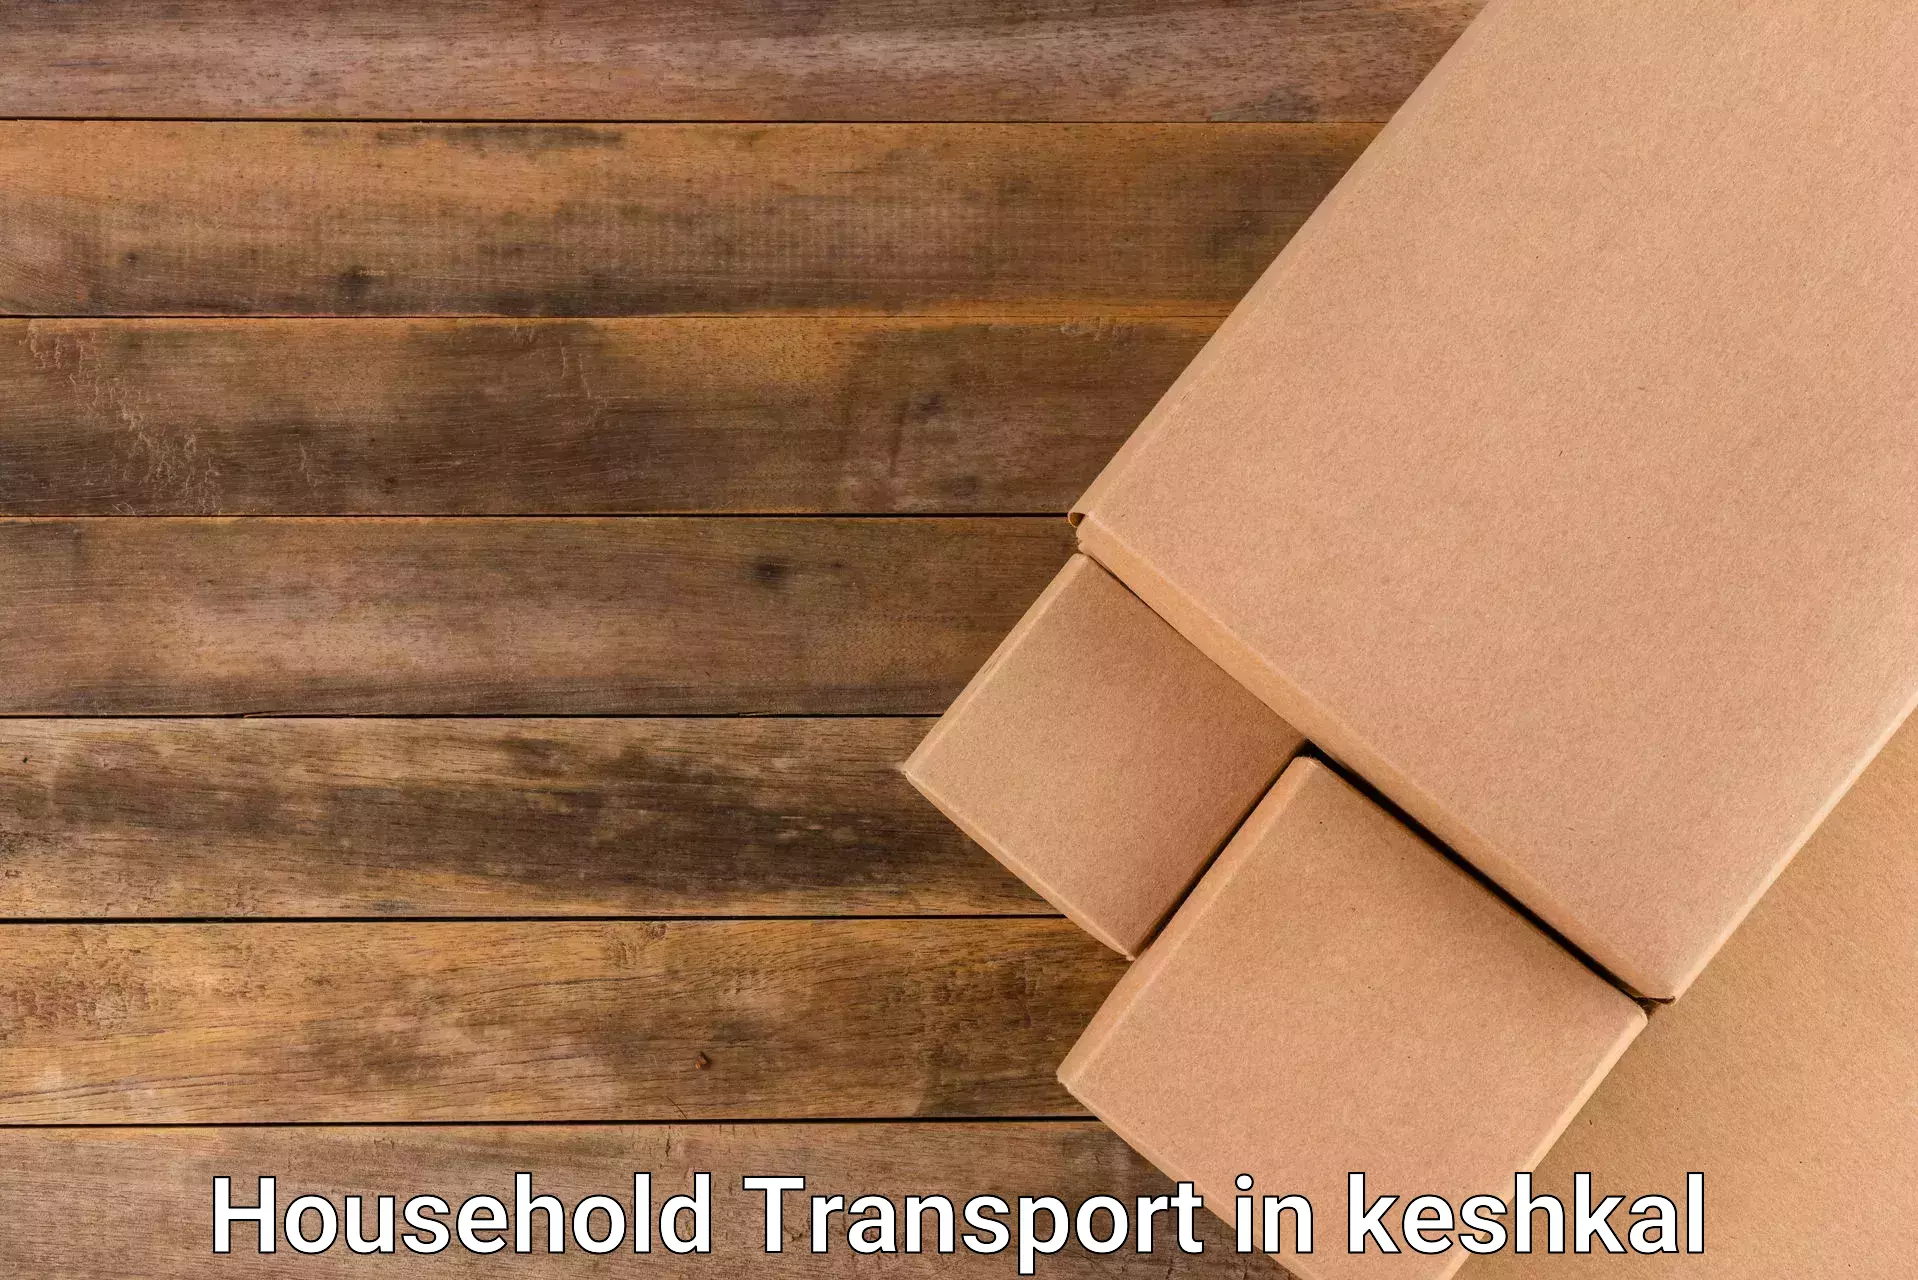 Moving and handling services in keshkal